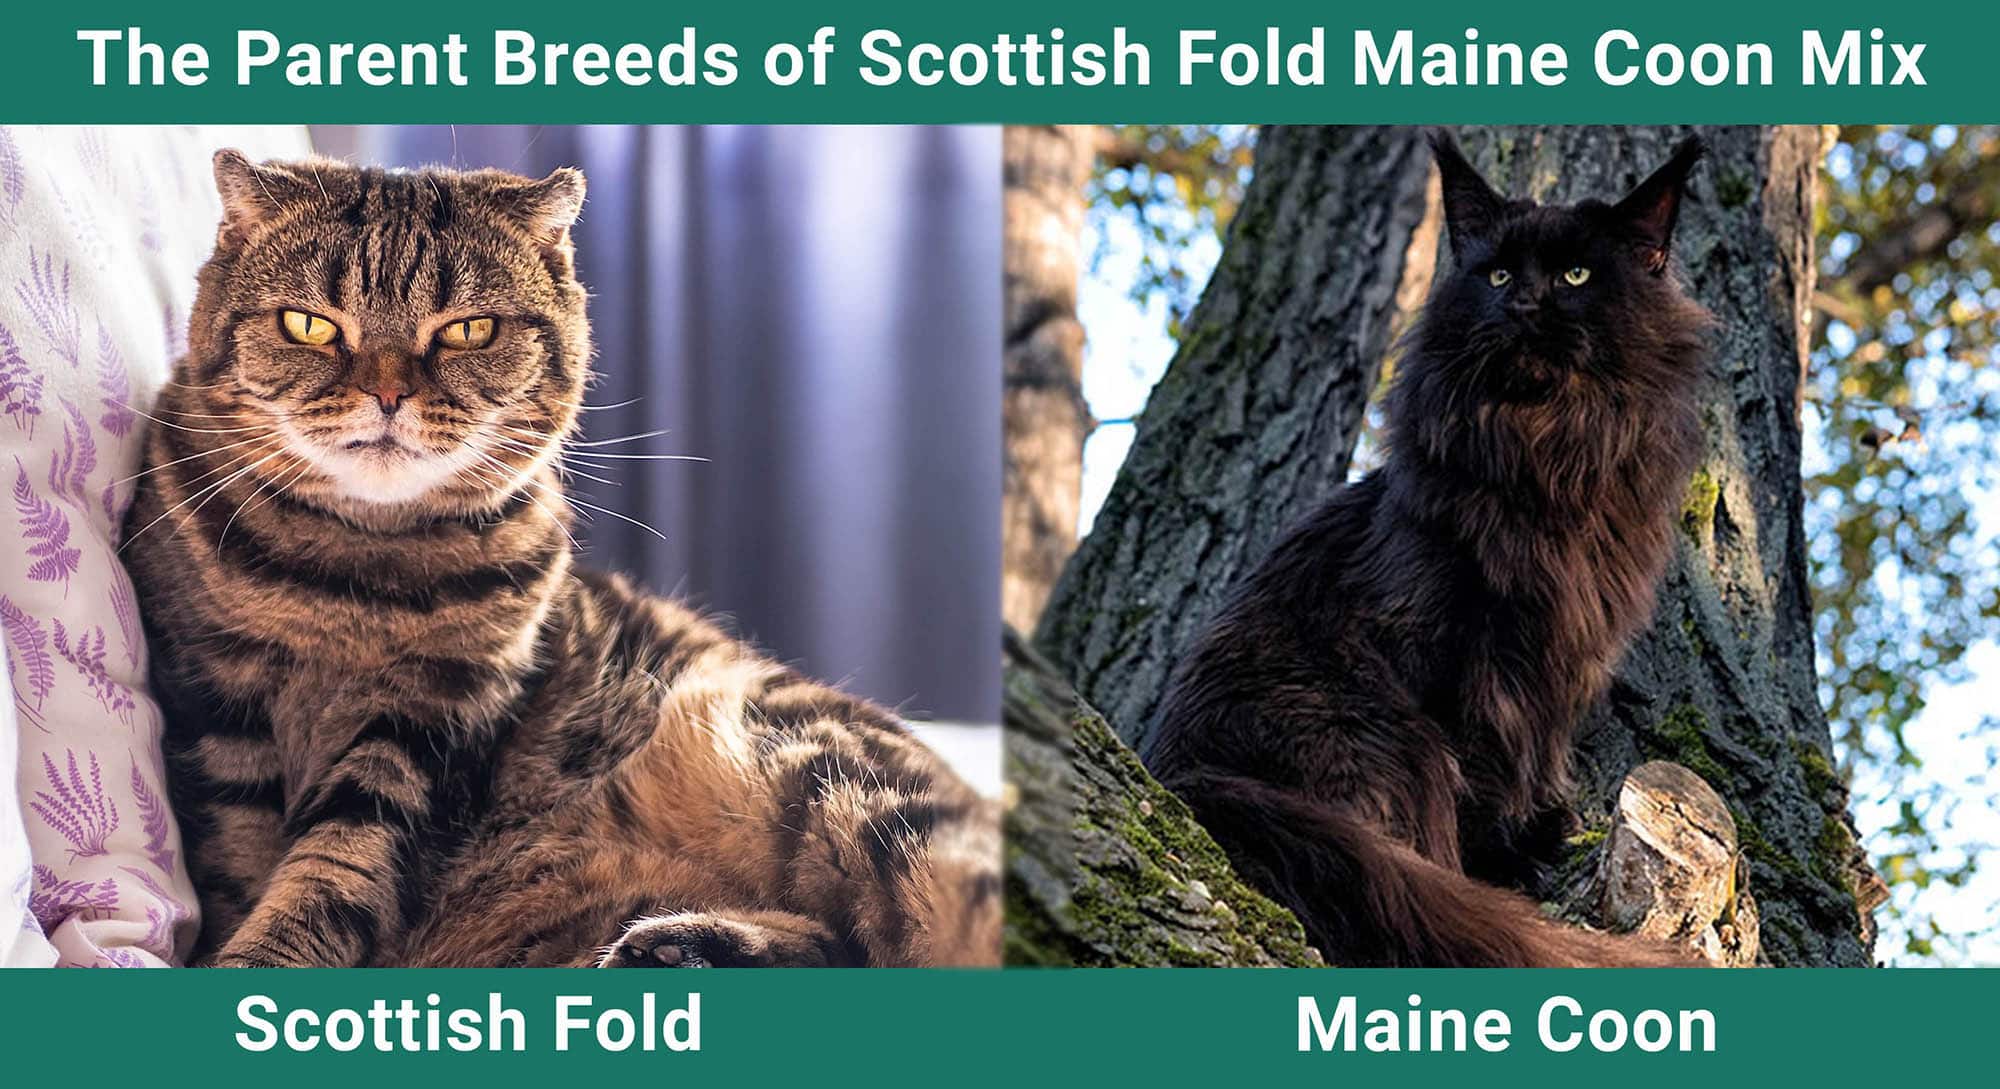 The Parent Breeds of Scottish Fold Maine Coon Mix